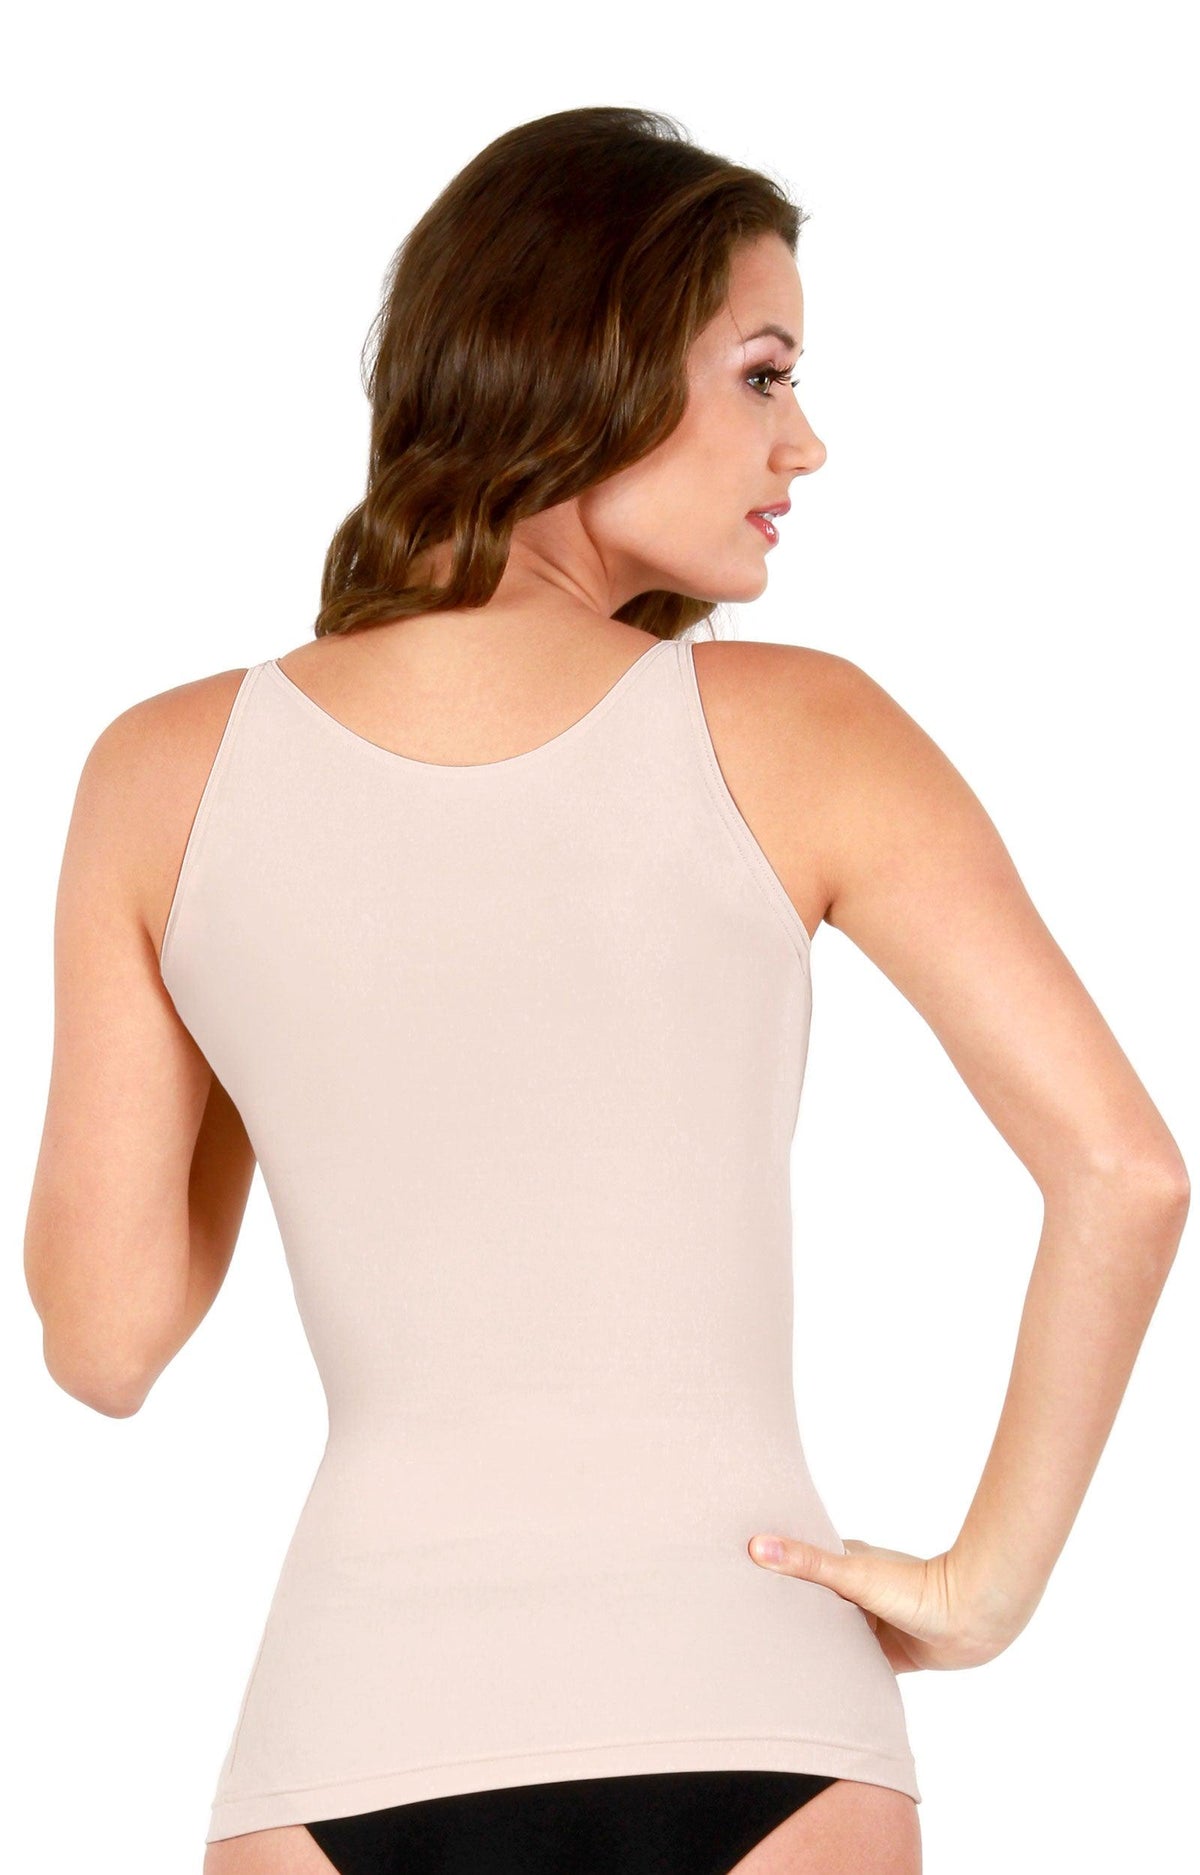 Orangetree Boutique - Make visible bra lines and back bulges a thing of the  past with 'Shapeez' the ultimate back smoothing and shape-wear solution !  All sizes and styles available, come in